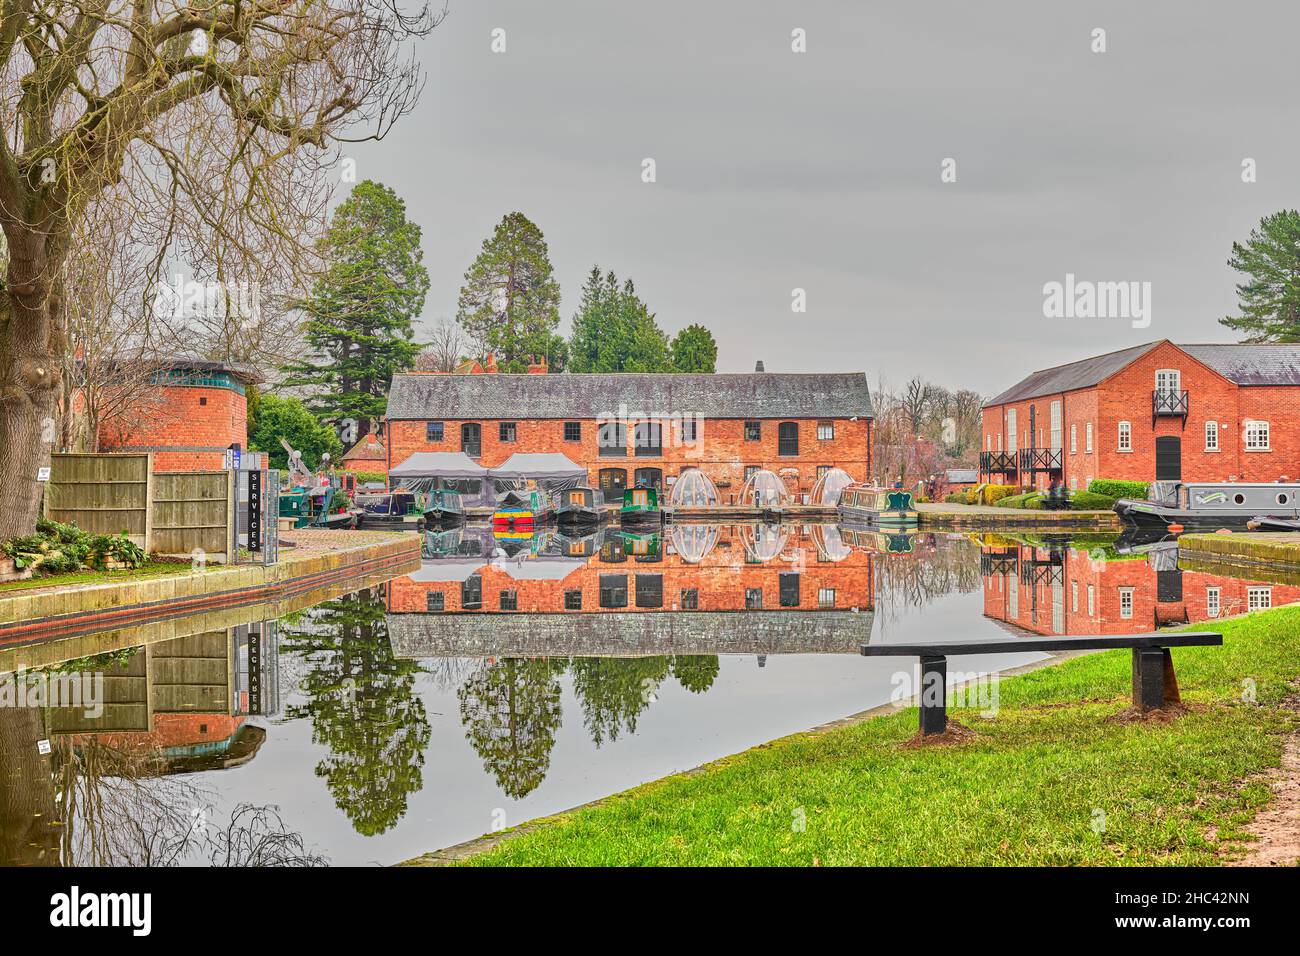 Former warehouses converted to a restaurant and flats on the Union Wharf terminus basin of the Grand Union canal at Market Harborough, England. Stock Photo